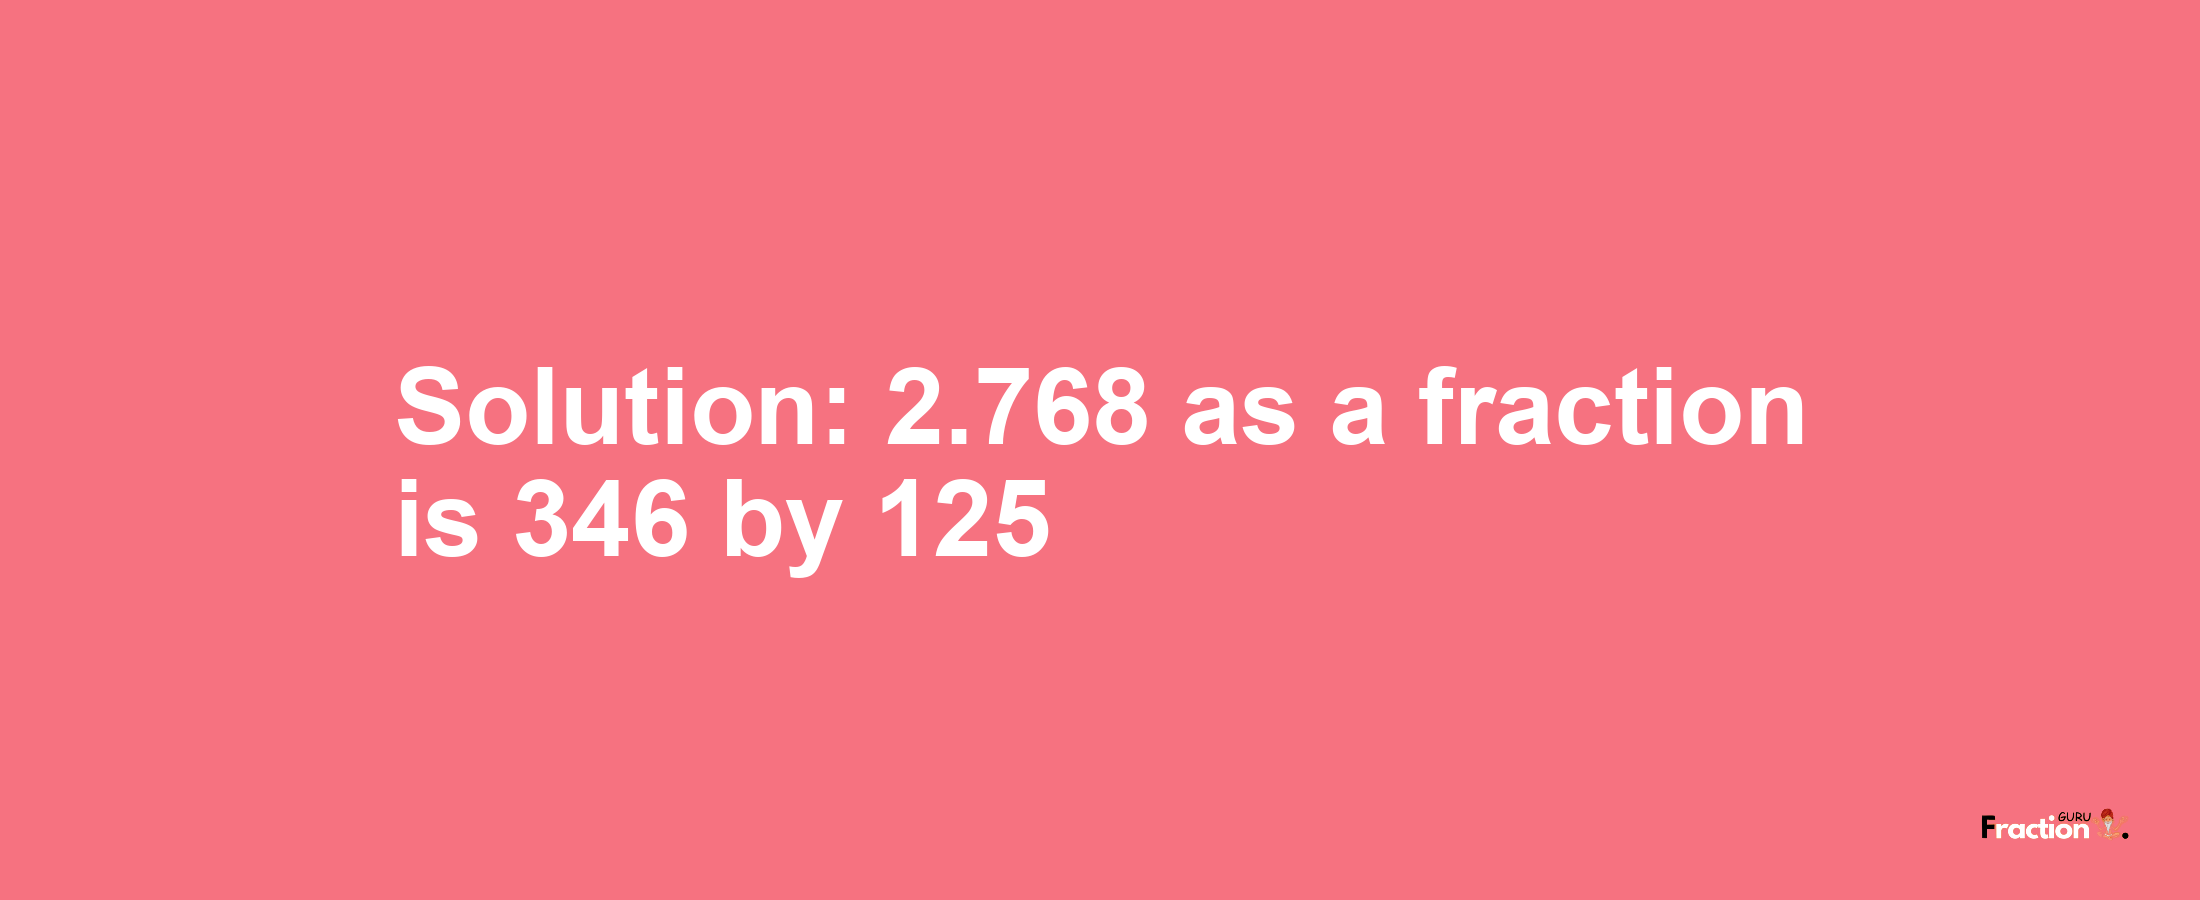 Solution:2.768 as a fraction is 346/125